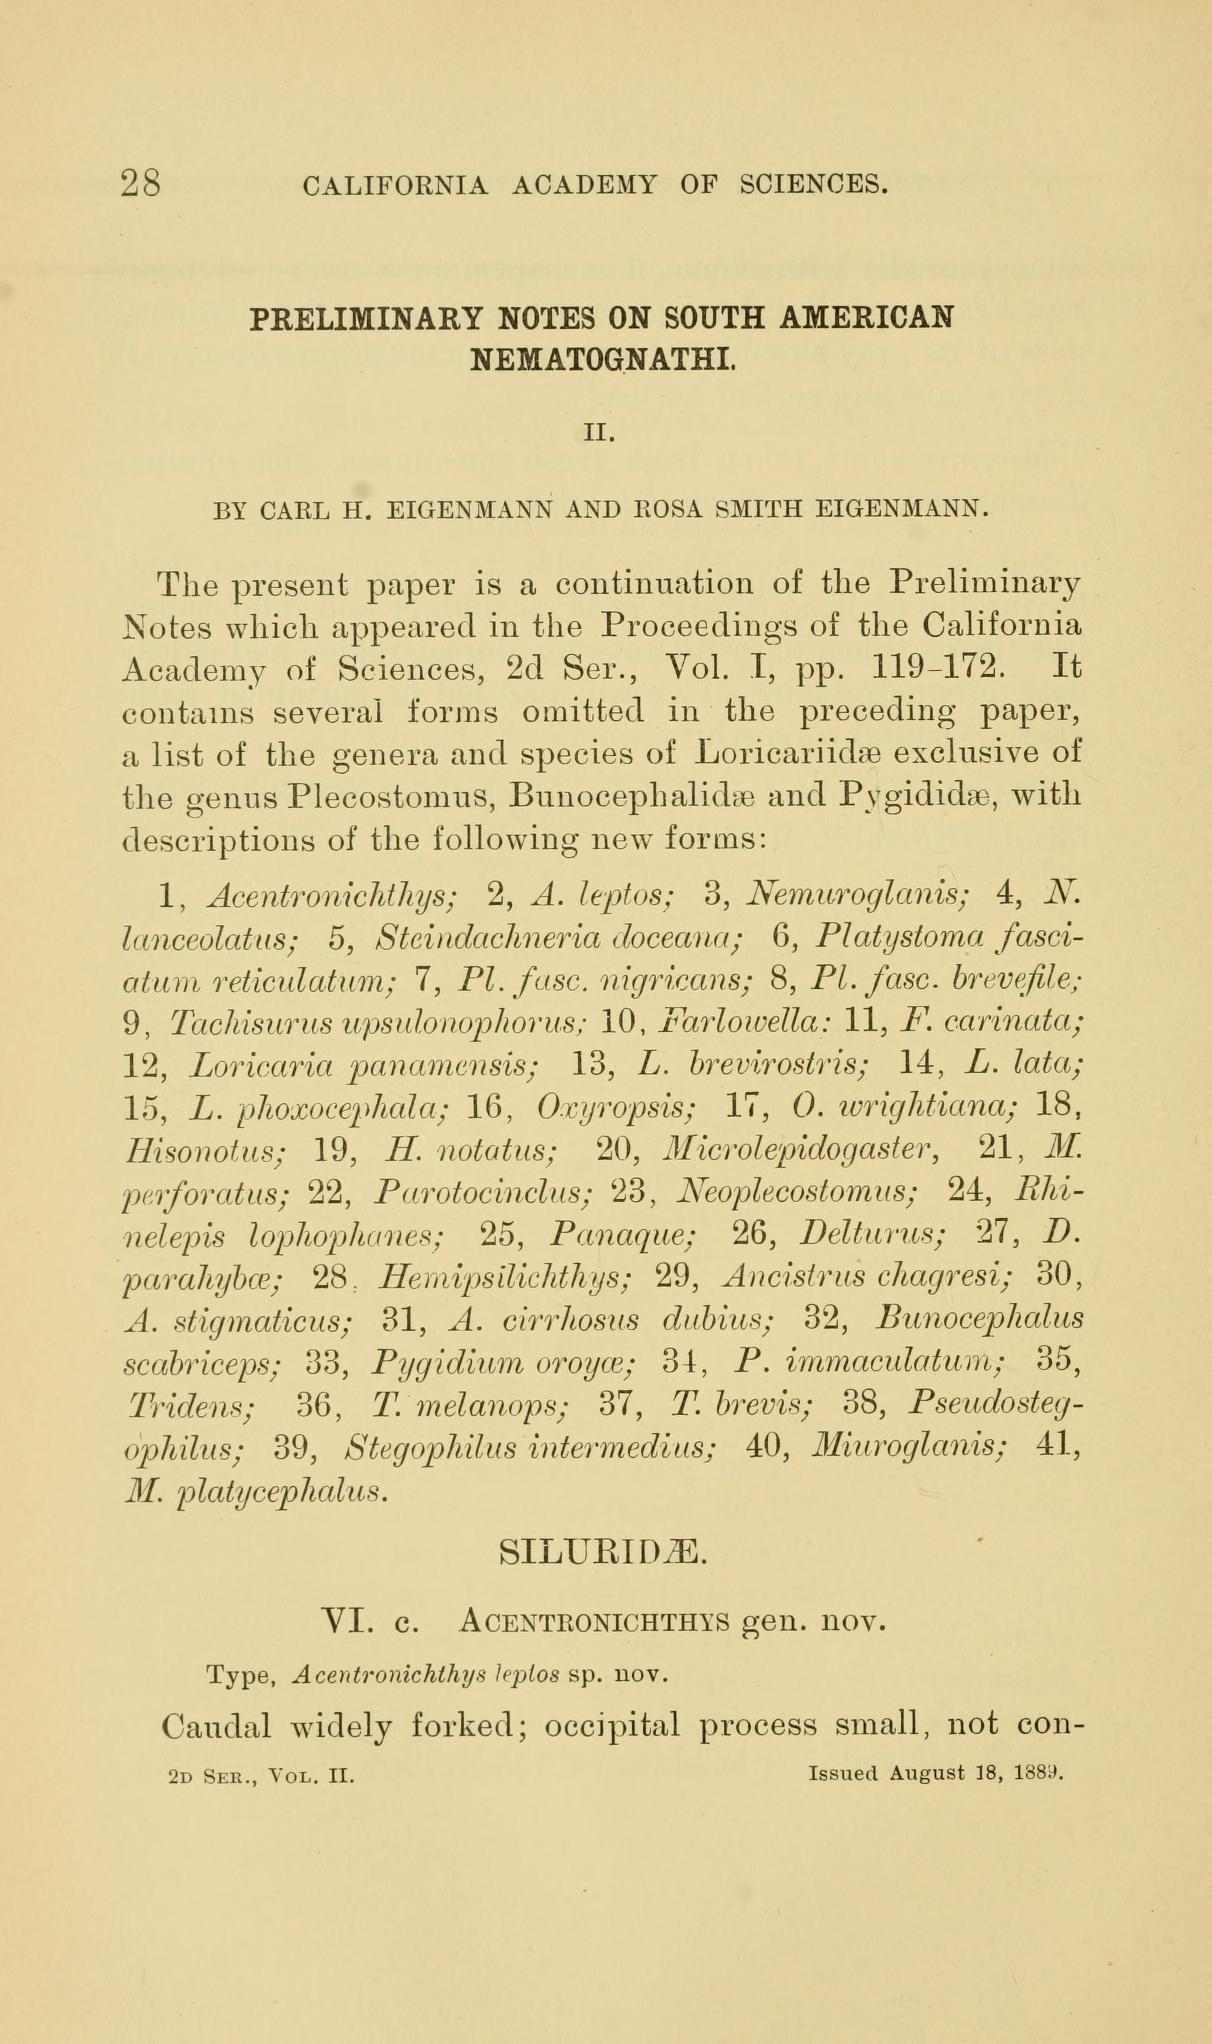 Media of type image, Eigenmann and Eigenmann 1889. Description:Preliminary notes on South American Nematognathi. II. Proceedings of the California Academy of Sciences 2:28-28. 